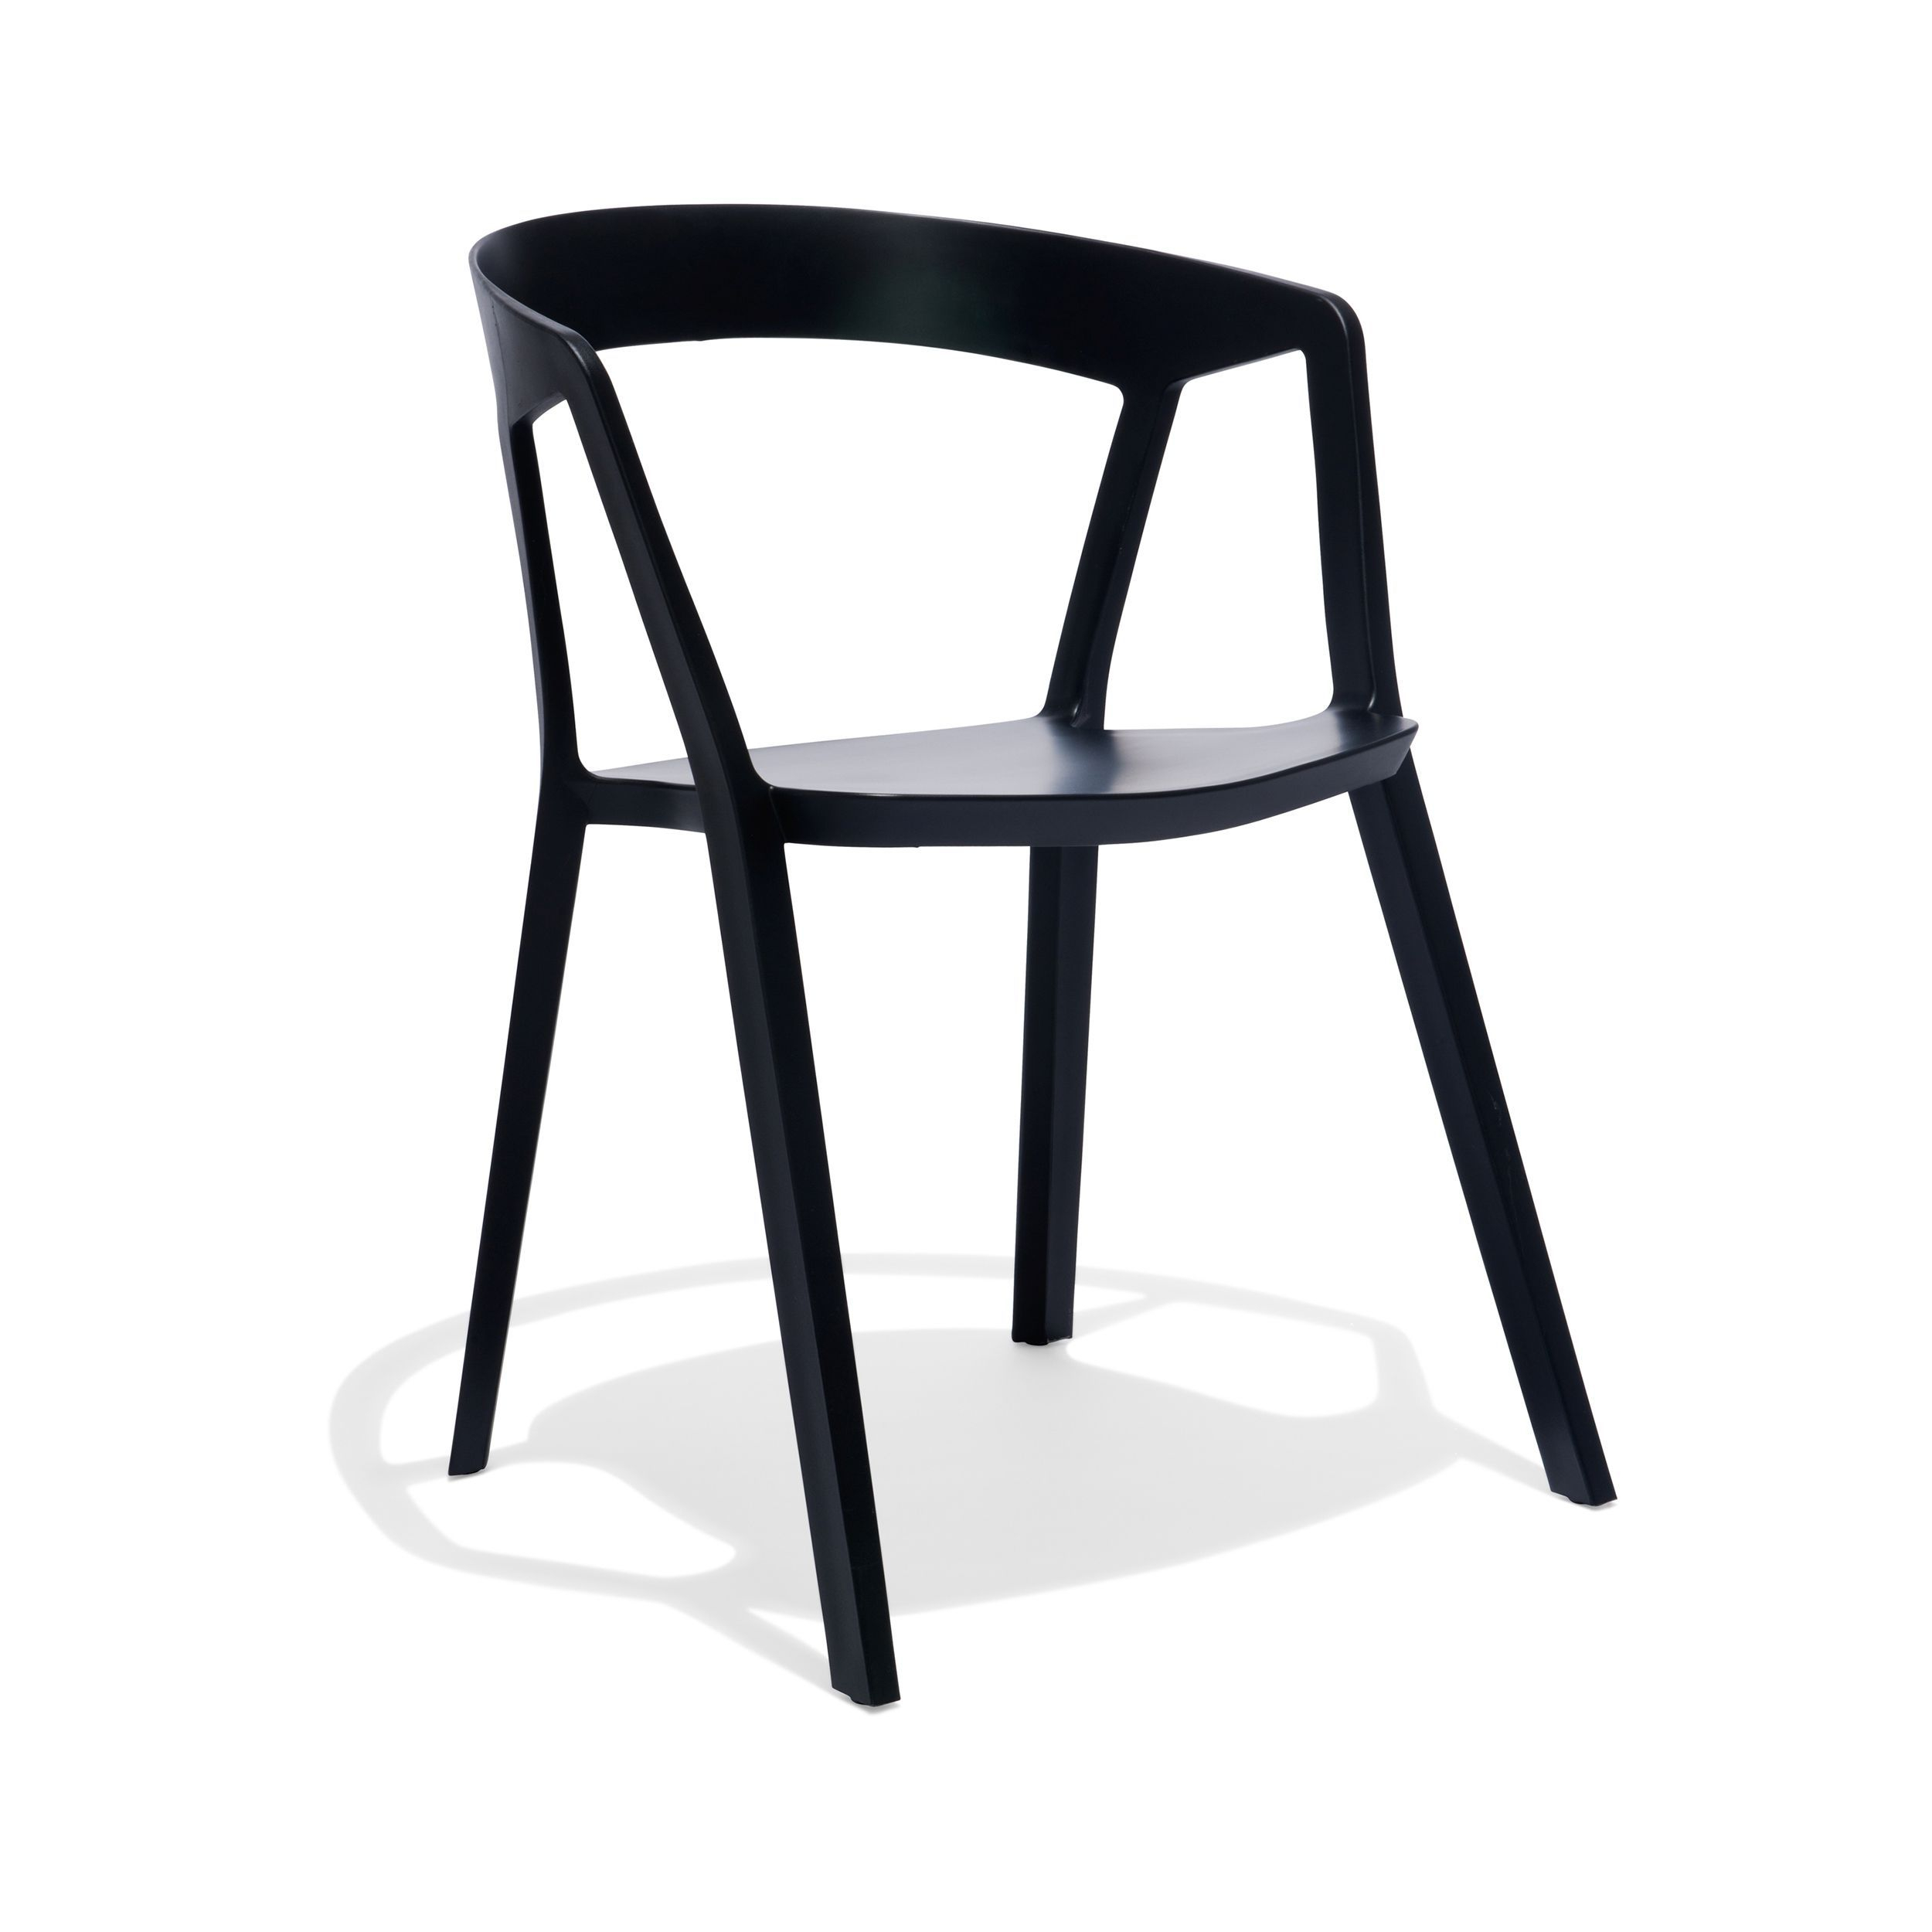 Nomad Chair Stackable Chairs Chair Metal Patio Chairs in size 2500 X 2500